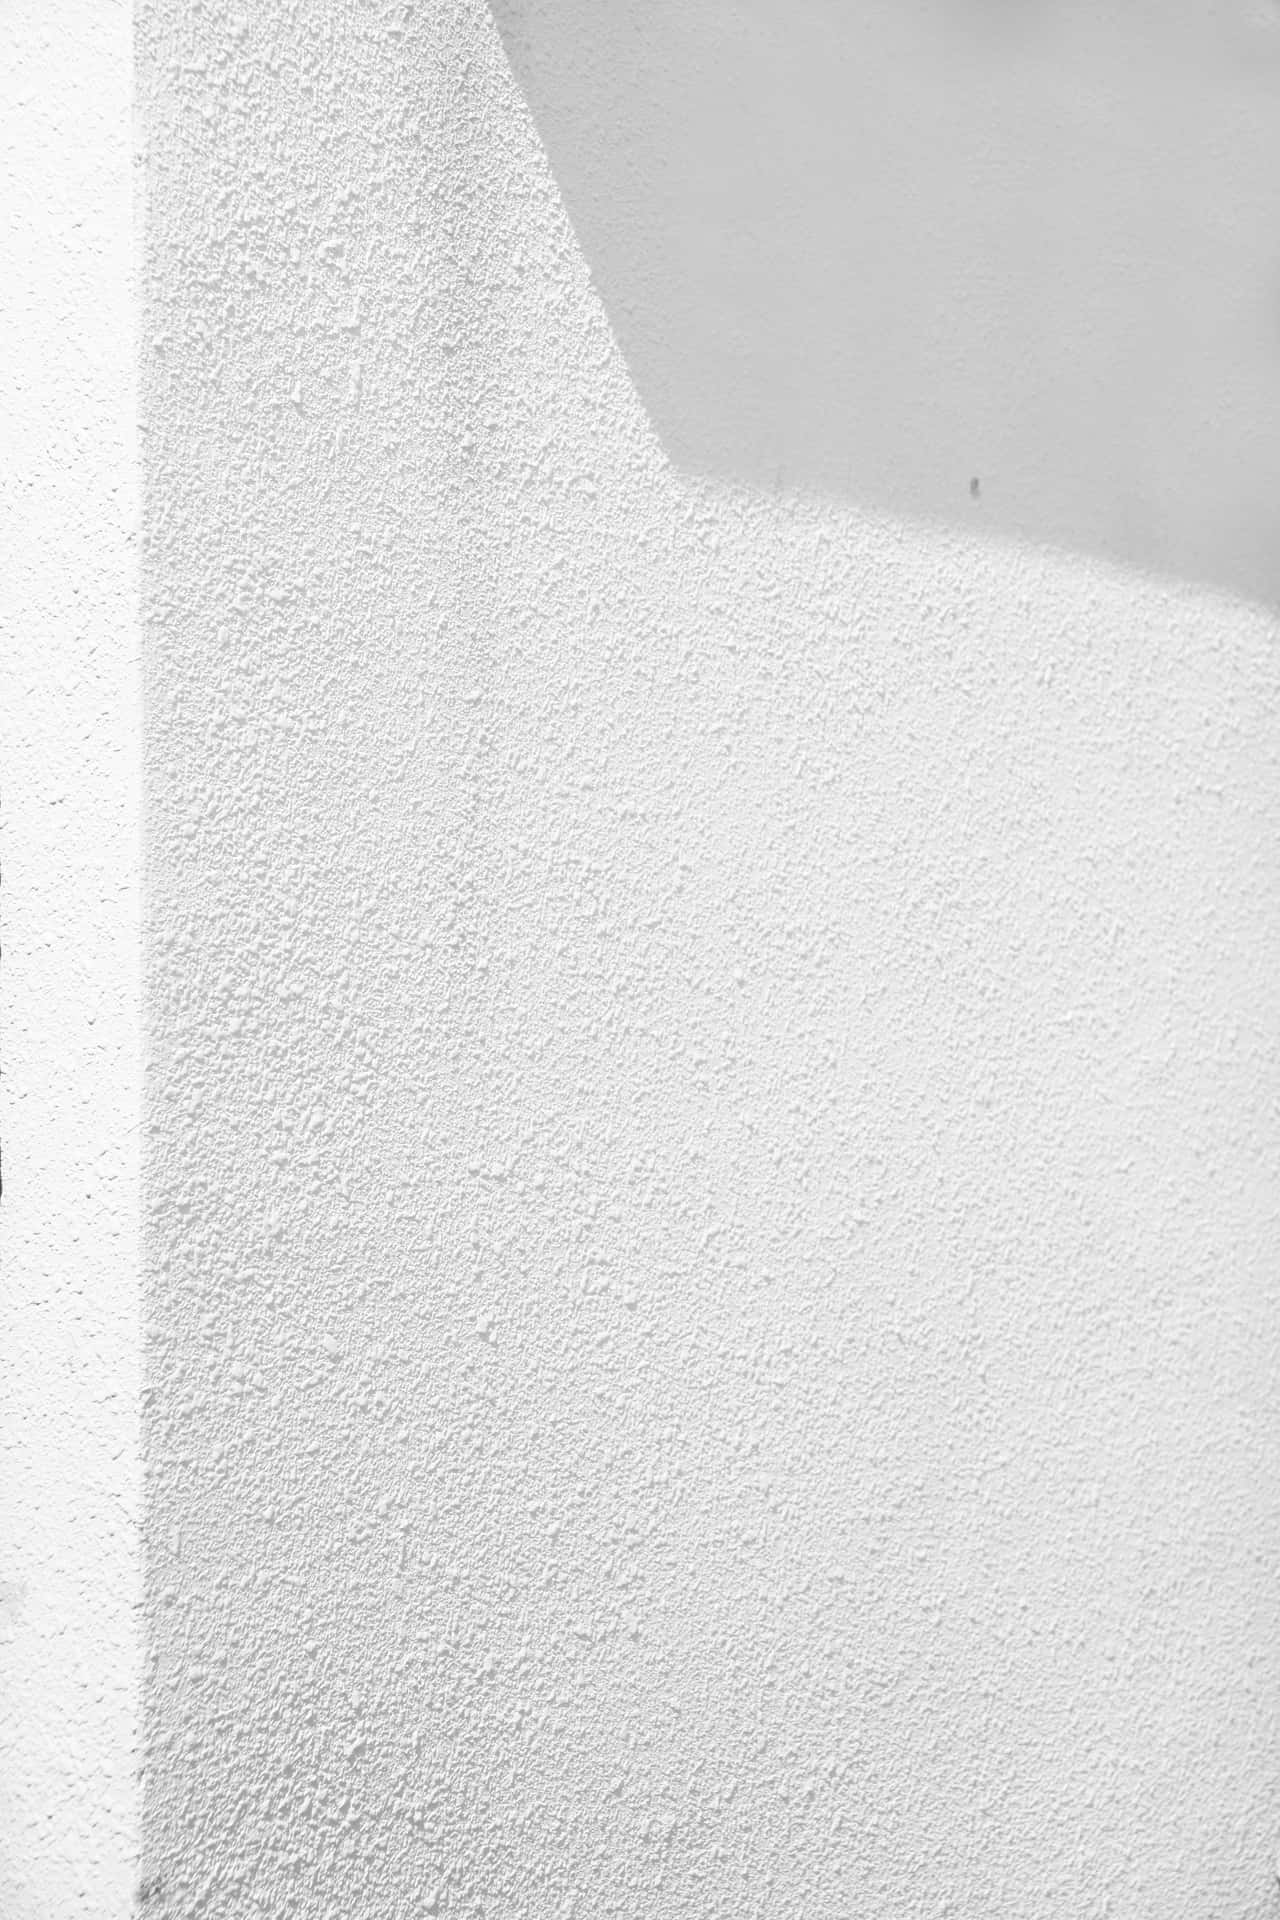 White Wall Background Bumpy Rough Texture